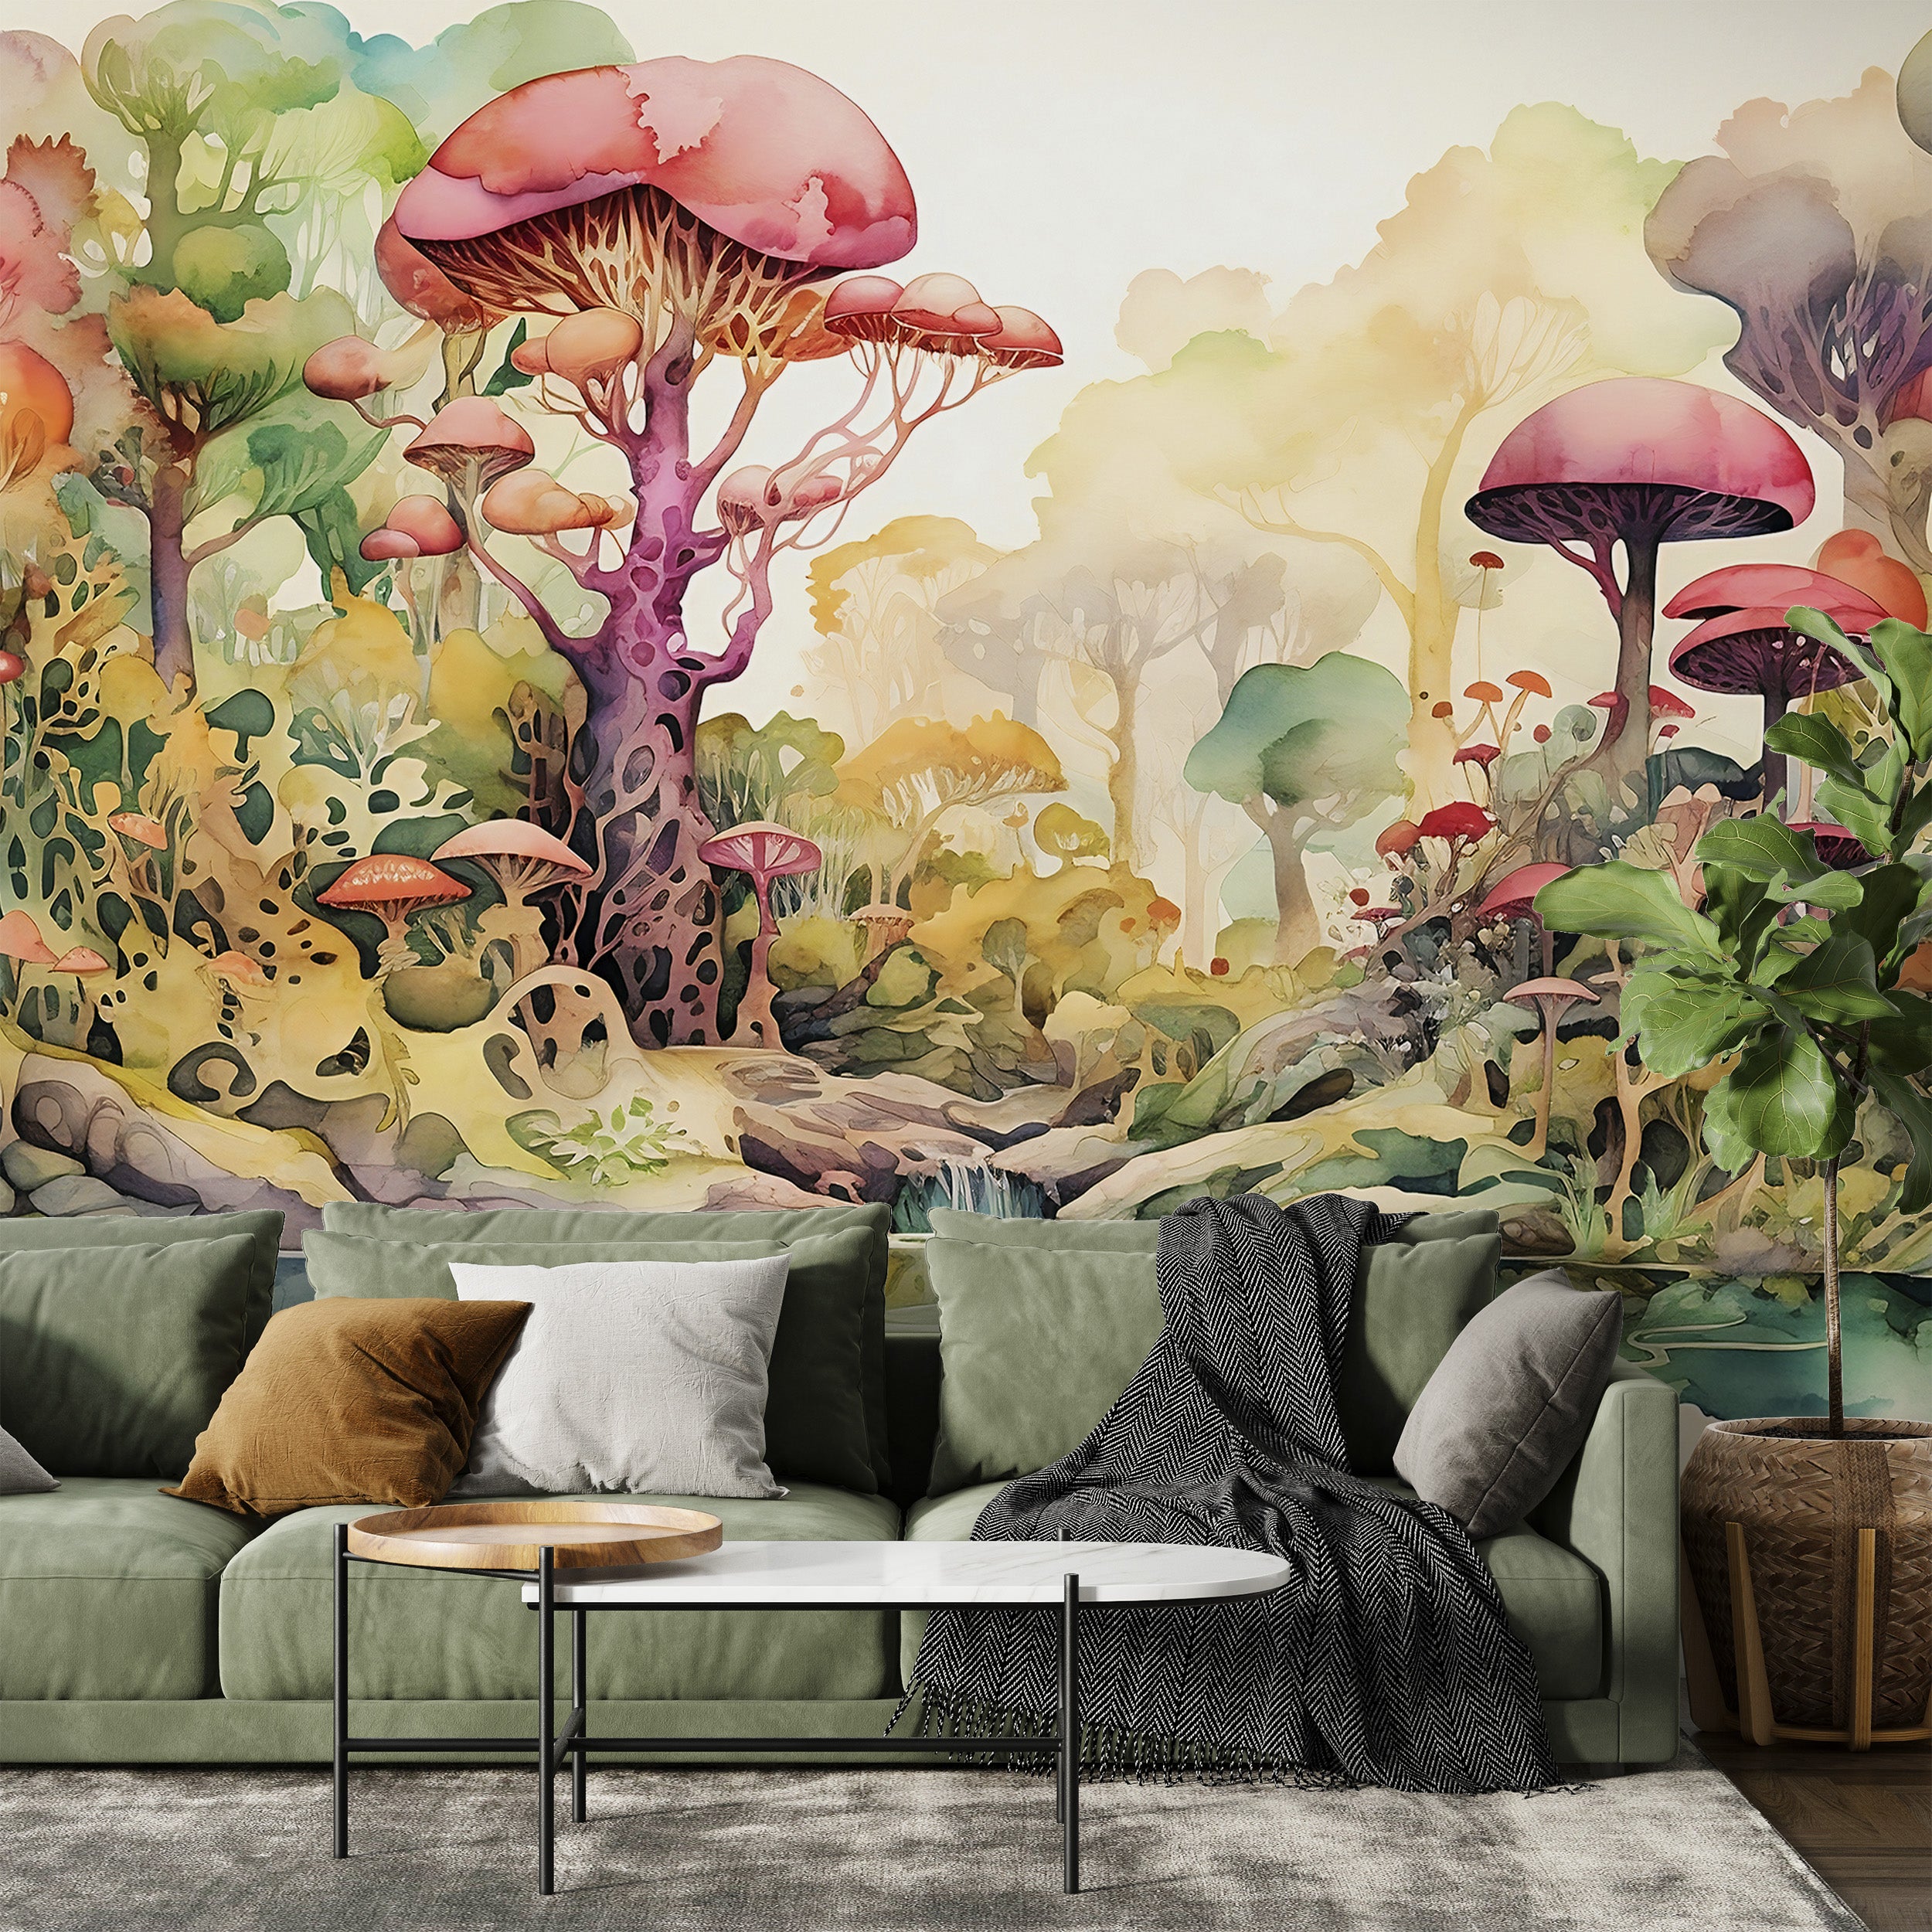 Create a Dreamy Oasis with Fairy Forest Mural